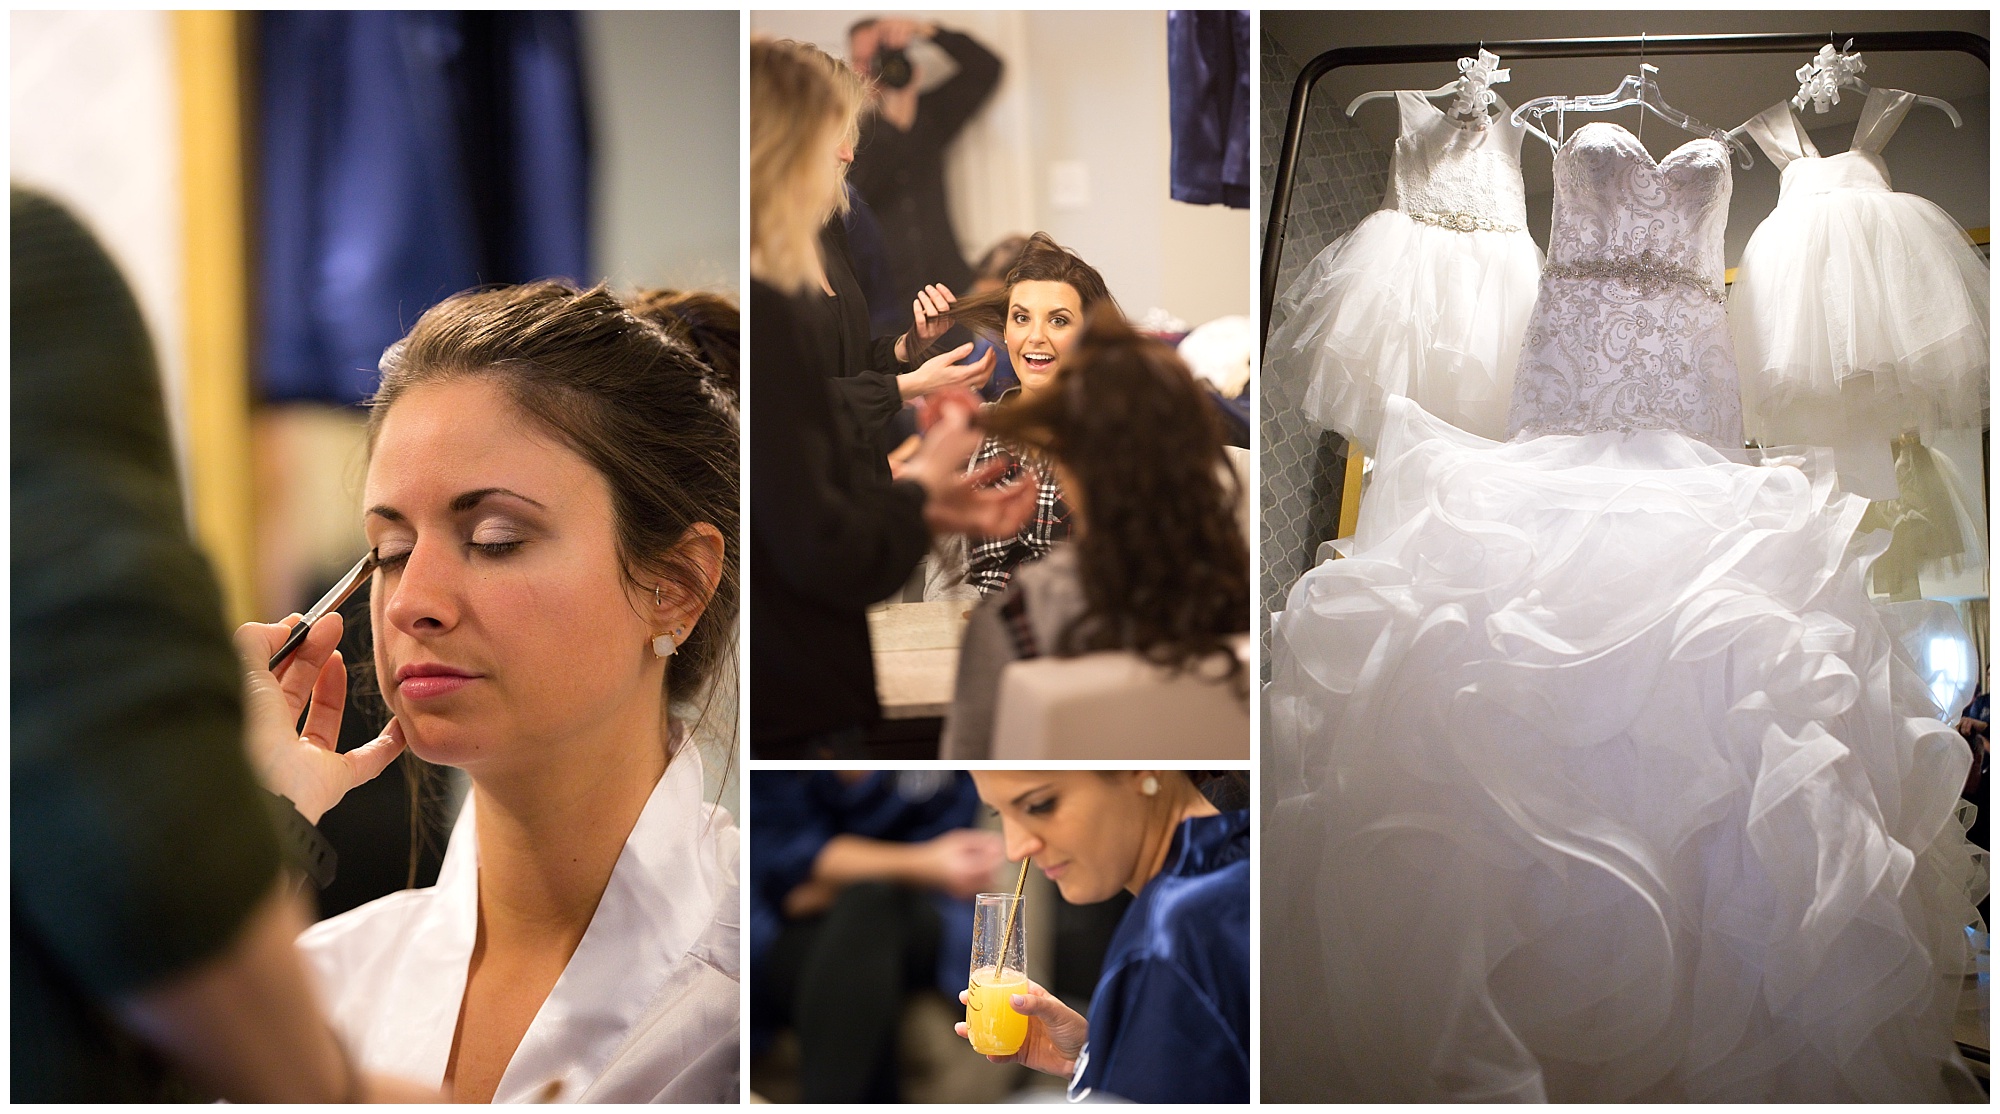 Four photos including a bridal party getting ready and a photo of dresses.